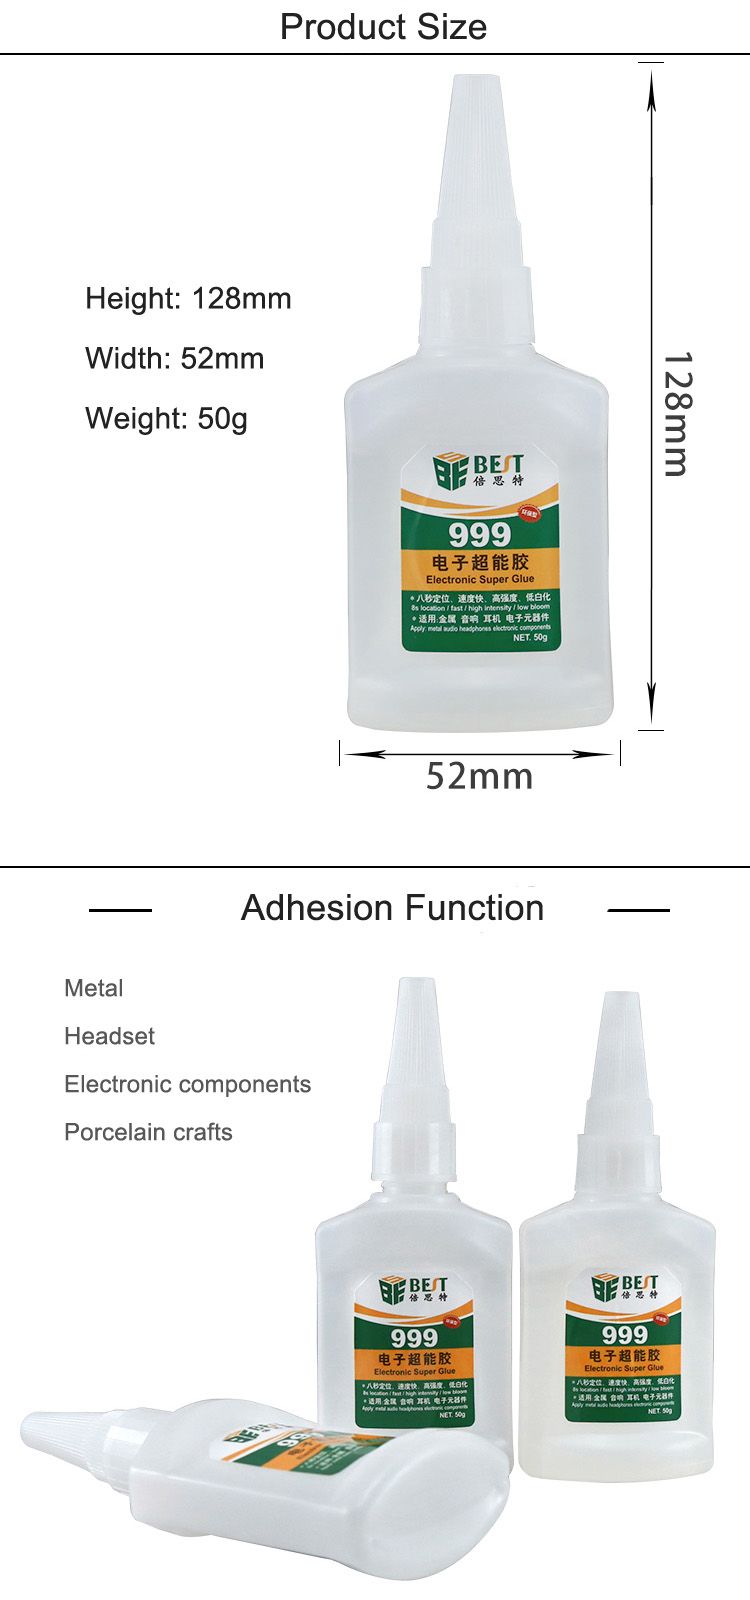 BEST-BST-999-50g-Universal-Super-Glue-for-Metal-Plastic-Shoes-Leather-Ceramic-Jewelry-Rubber-Environ-1351881